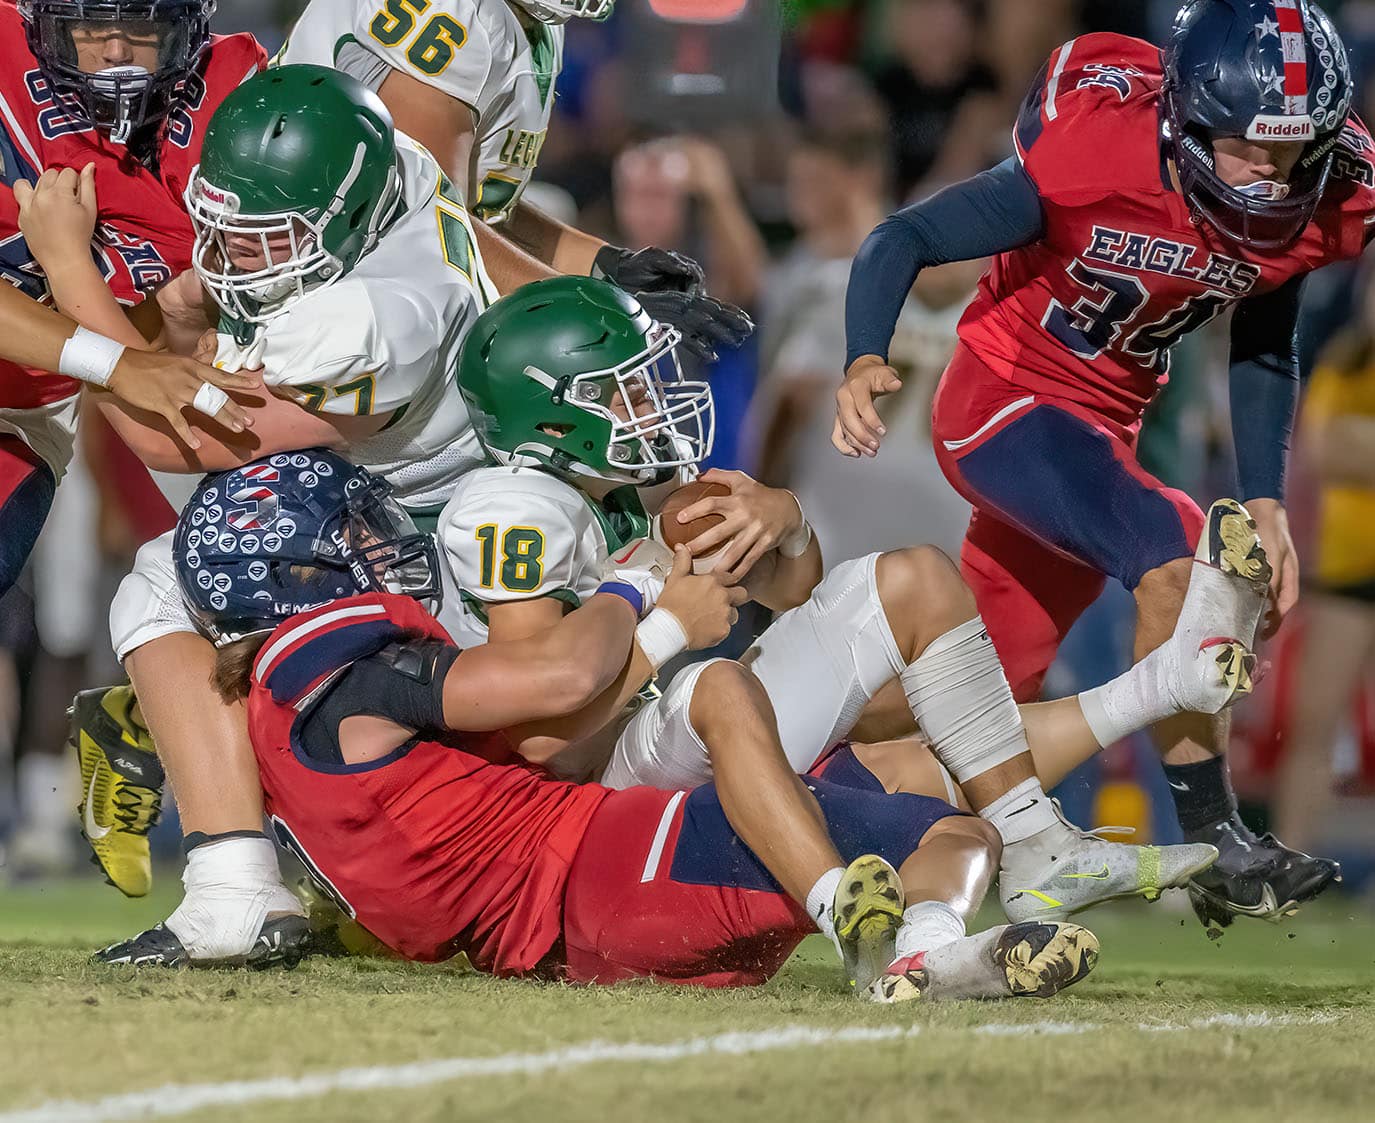 Eagle running back, 4, Connor Mccazzio rushes for a first down against the Lecanto defense. Photo by JOE DiCRISTOFALO